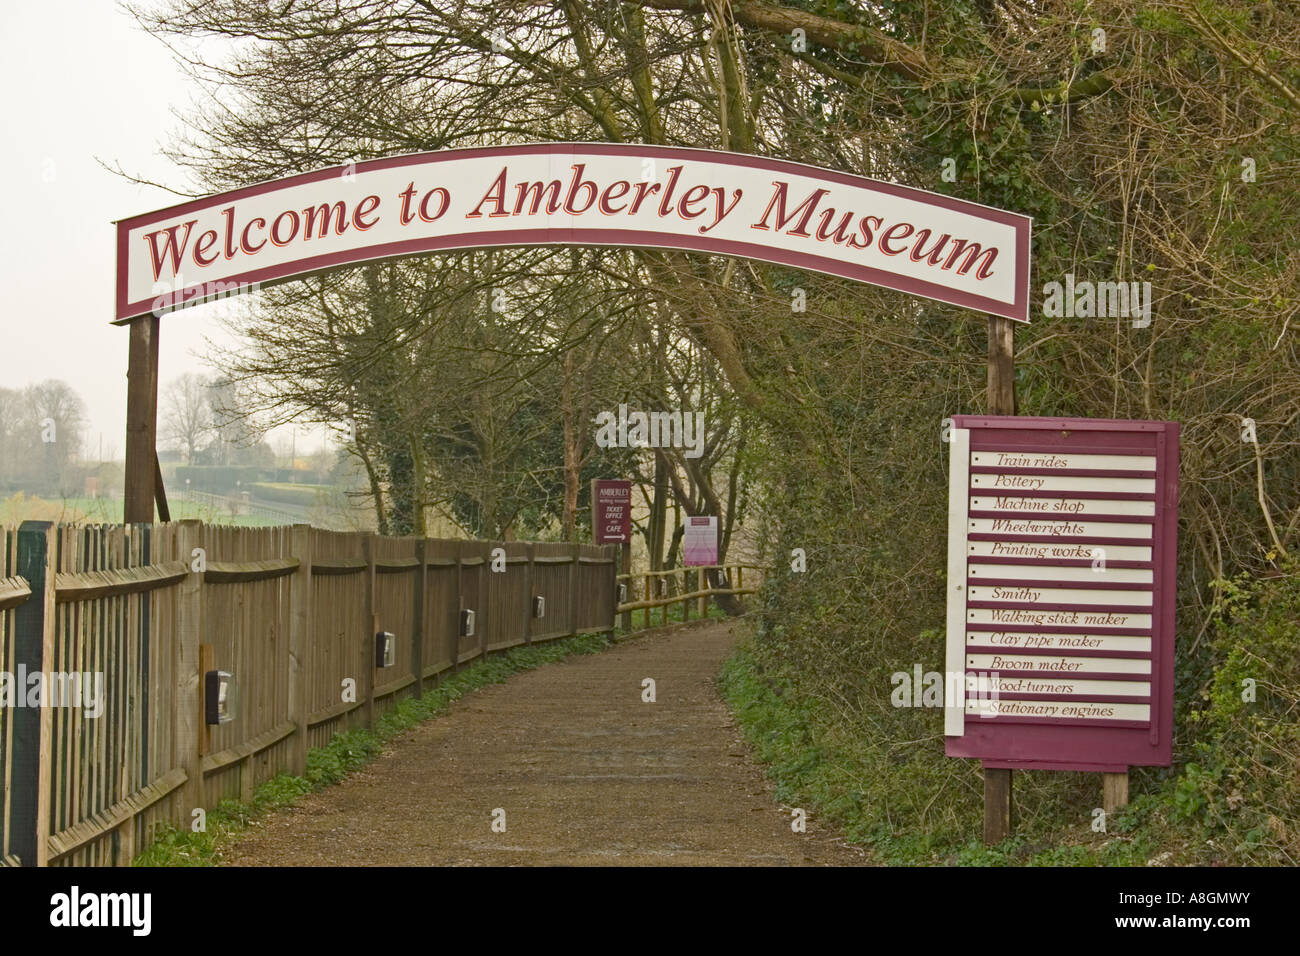 Amberley Working Museum, South Downs, West Sussex, Regno Unito. Foto Stock